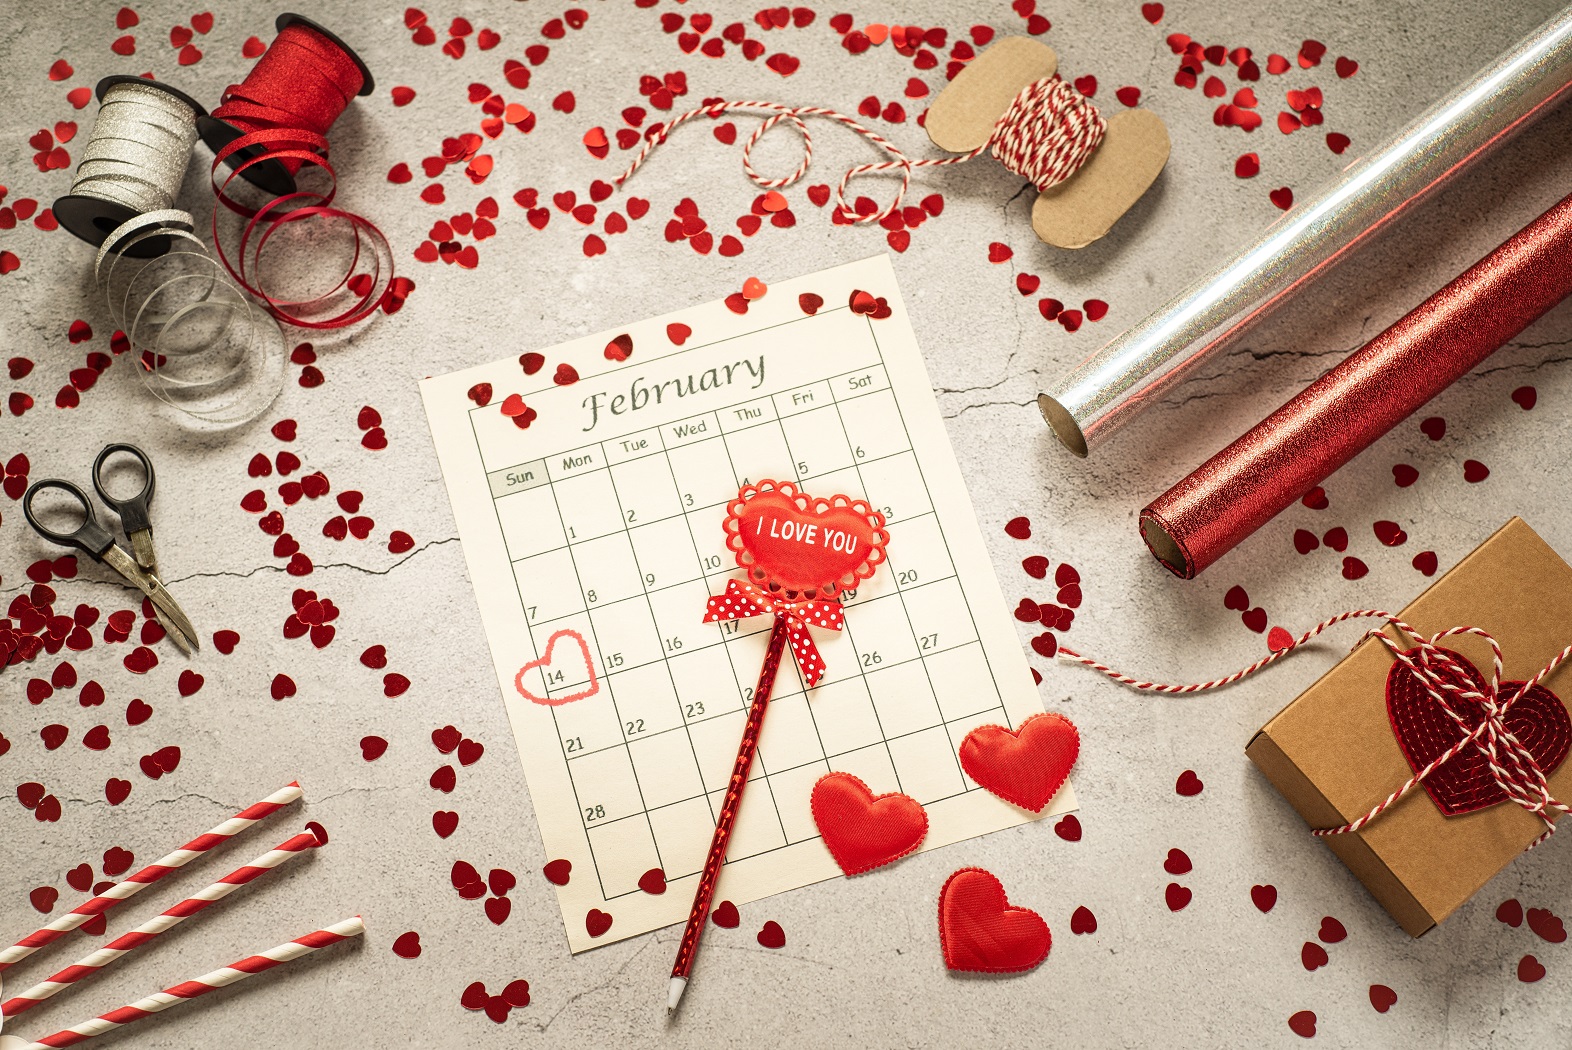 Happy Valentine's Day 2020: Romantic wishes, SMS, Quotes, Greetings, HD  Images, Facebook Status – India TV